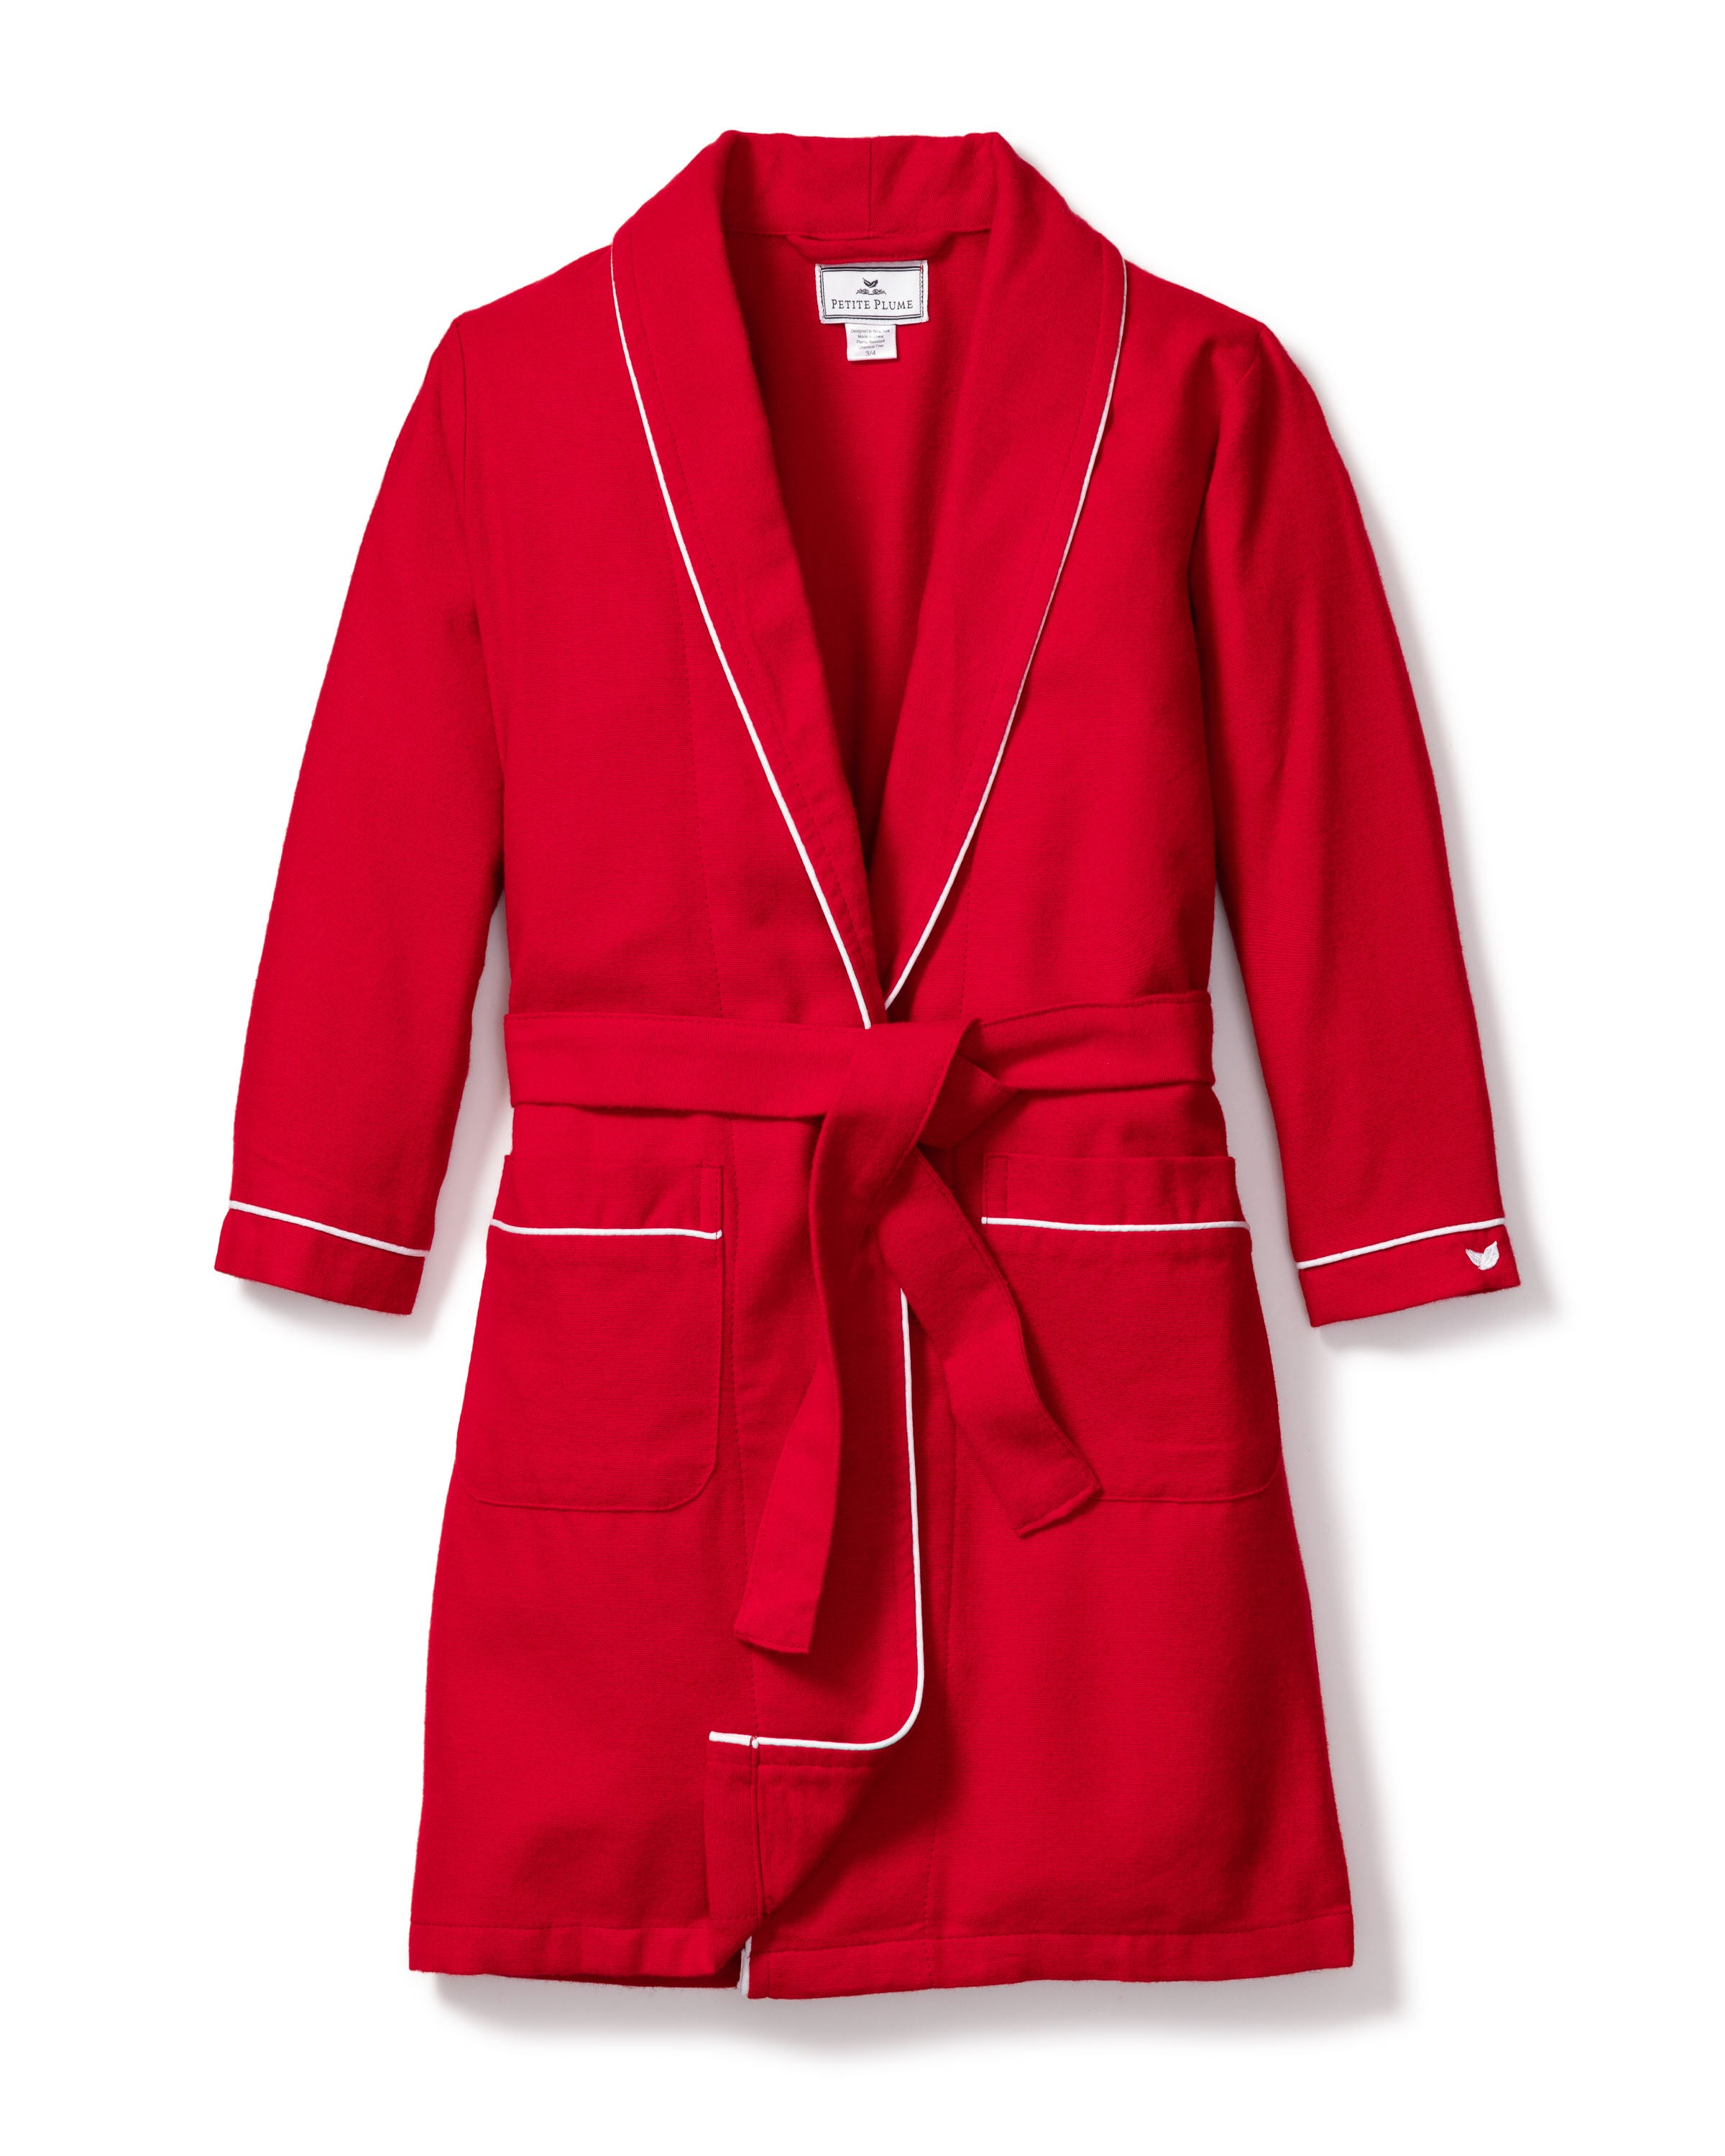 Kid's Flannel Robe in Red with White Piping